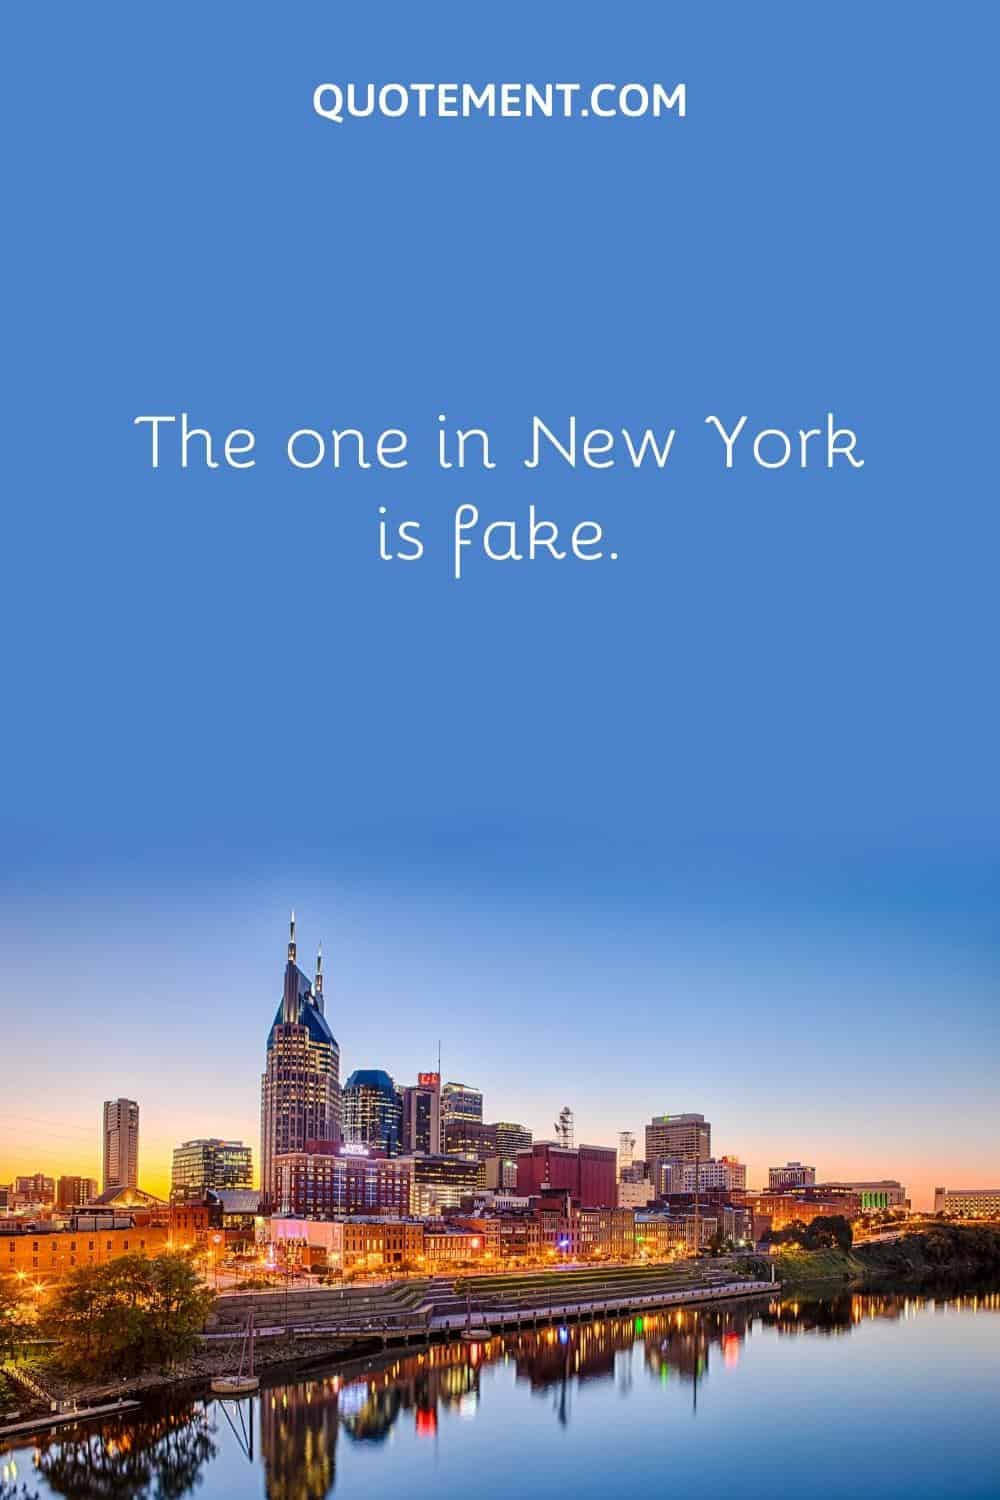 The one in New York is fake.